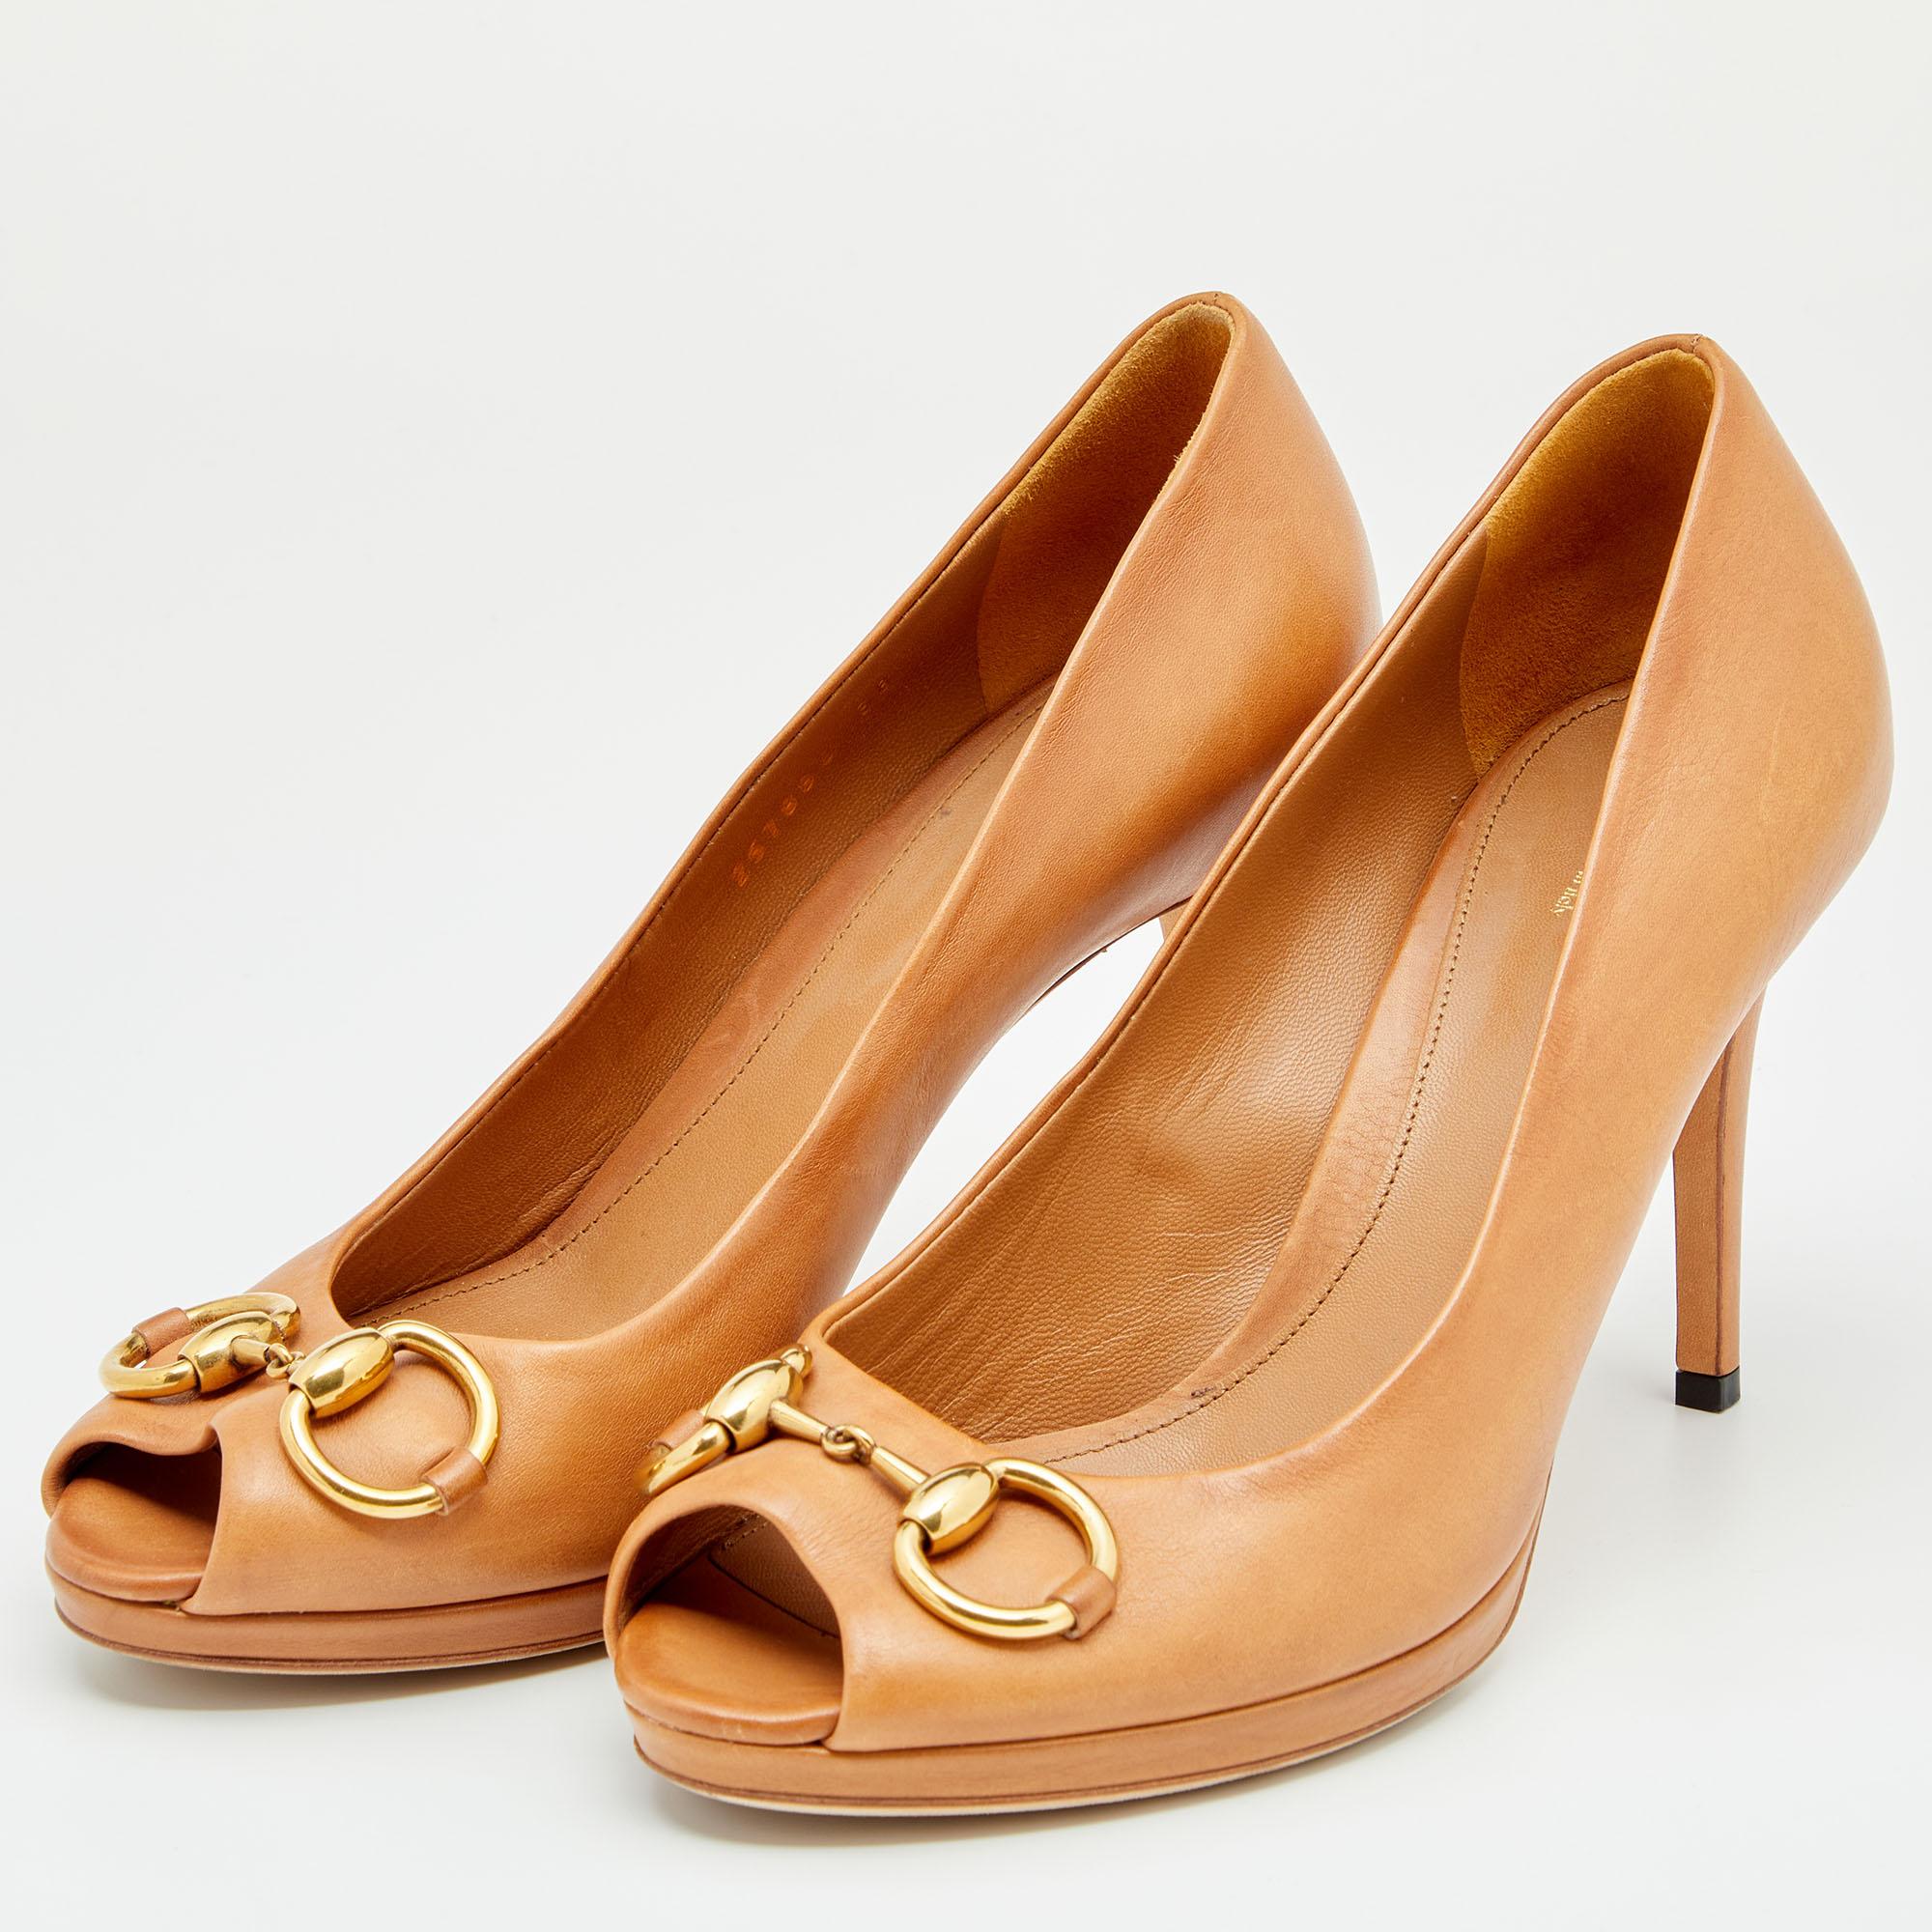 Gucci's timeless aesthetic and stellar craftsmanship in shoemaking is evident in these stunning pumps. Crafted from leather in a brown shade, they are topped with the signature Horsebit accent and mounted on tall heels for the right amount of